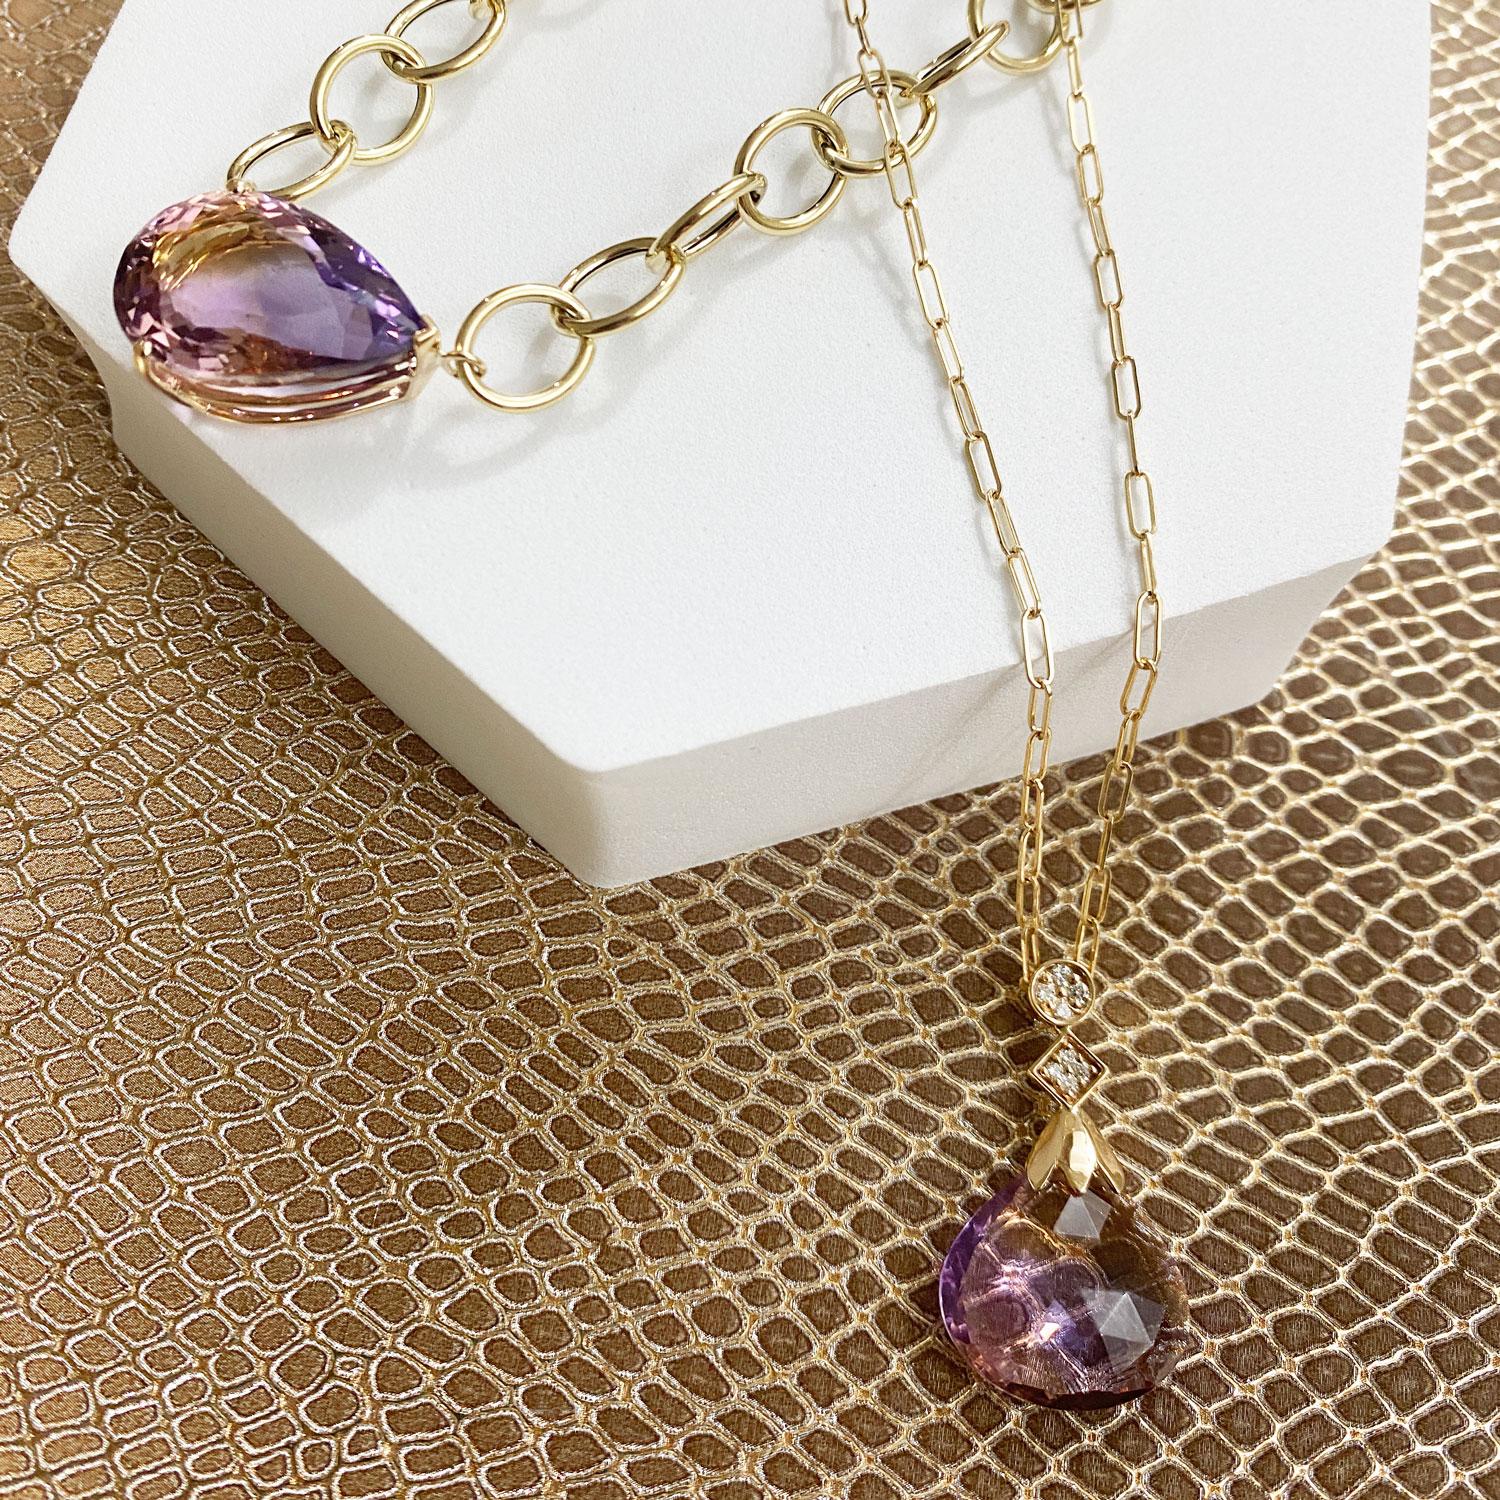 14K Yellow Gold

1 Pear Shaped Ametrine at approximately 17.10 Carats Total Weight

0.15 Carats Total Weight of Round White Brilliant Diamond 

Clarity: SI / Color: H-I

Fine one-of-a-kind craftsmanship meets incredible quality in this breathtaking